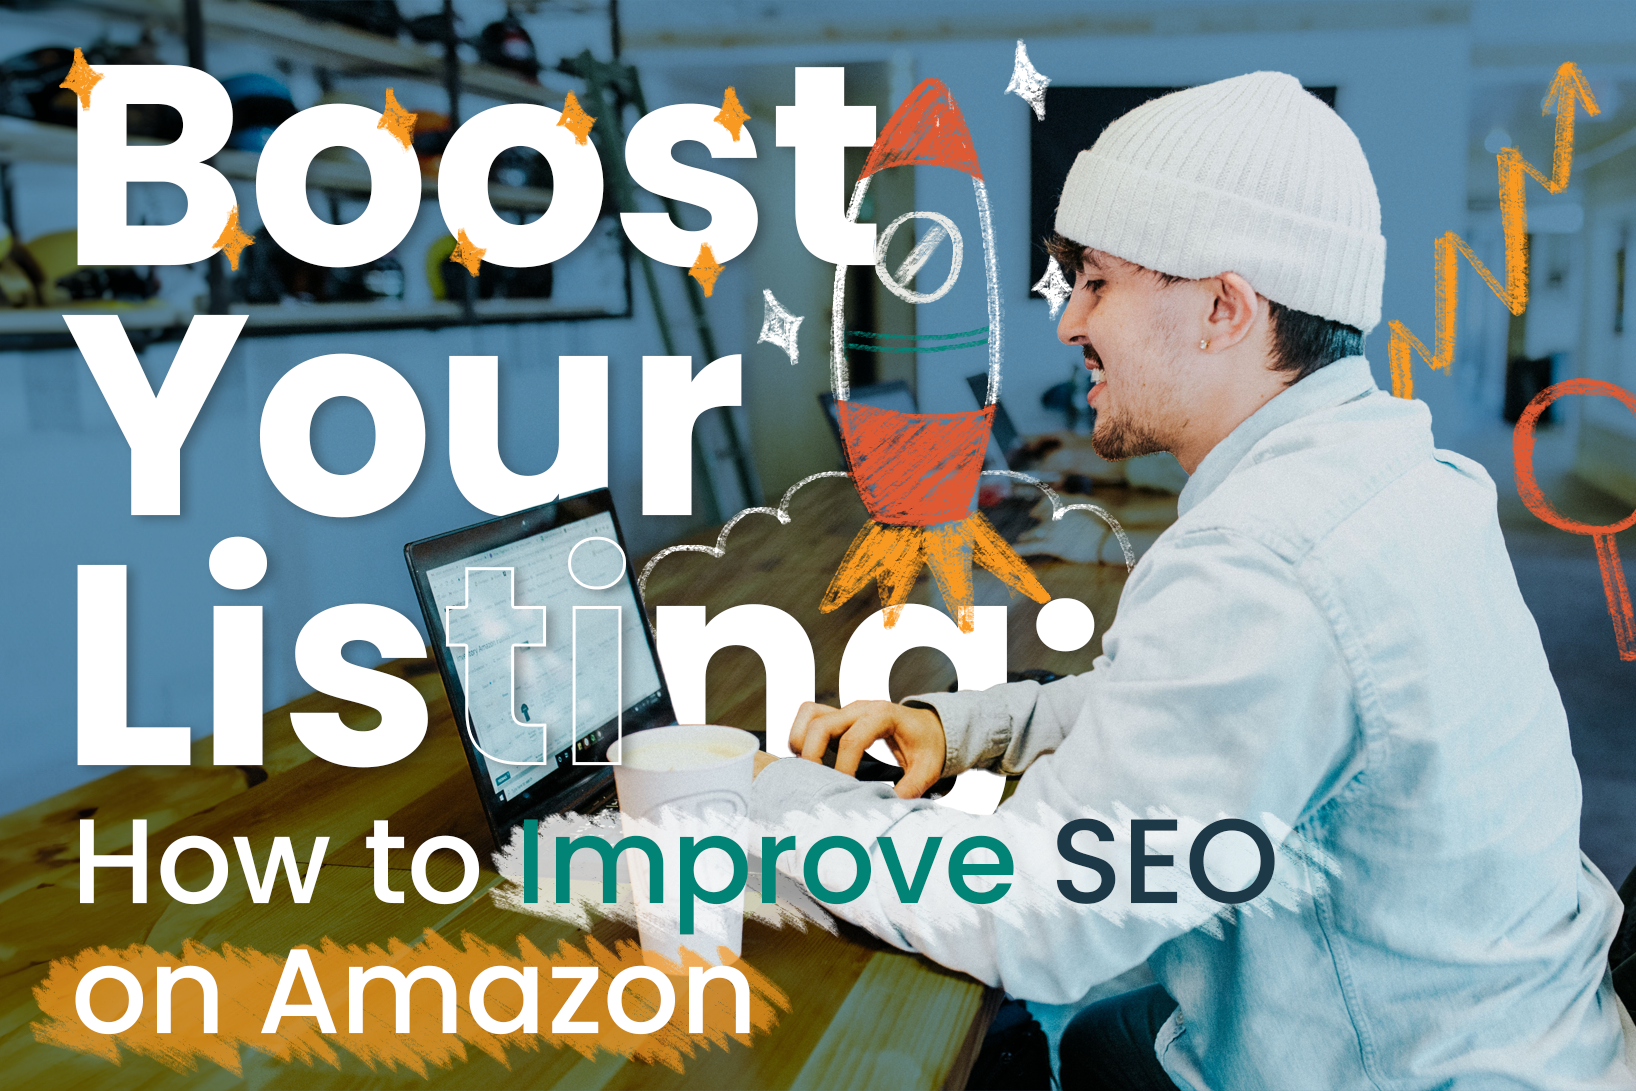 Boost Your Listing: How to Improve SEO on Amazon